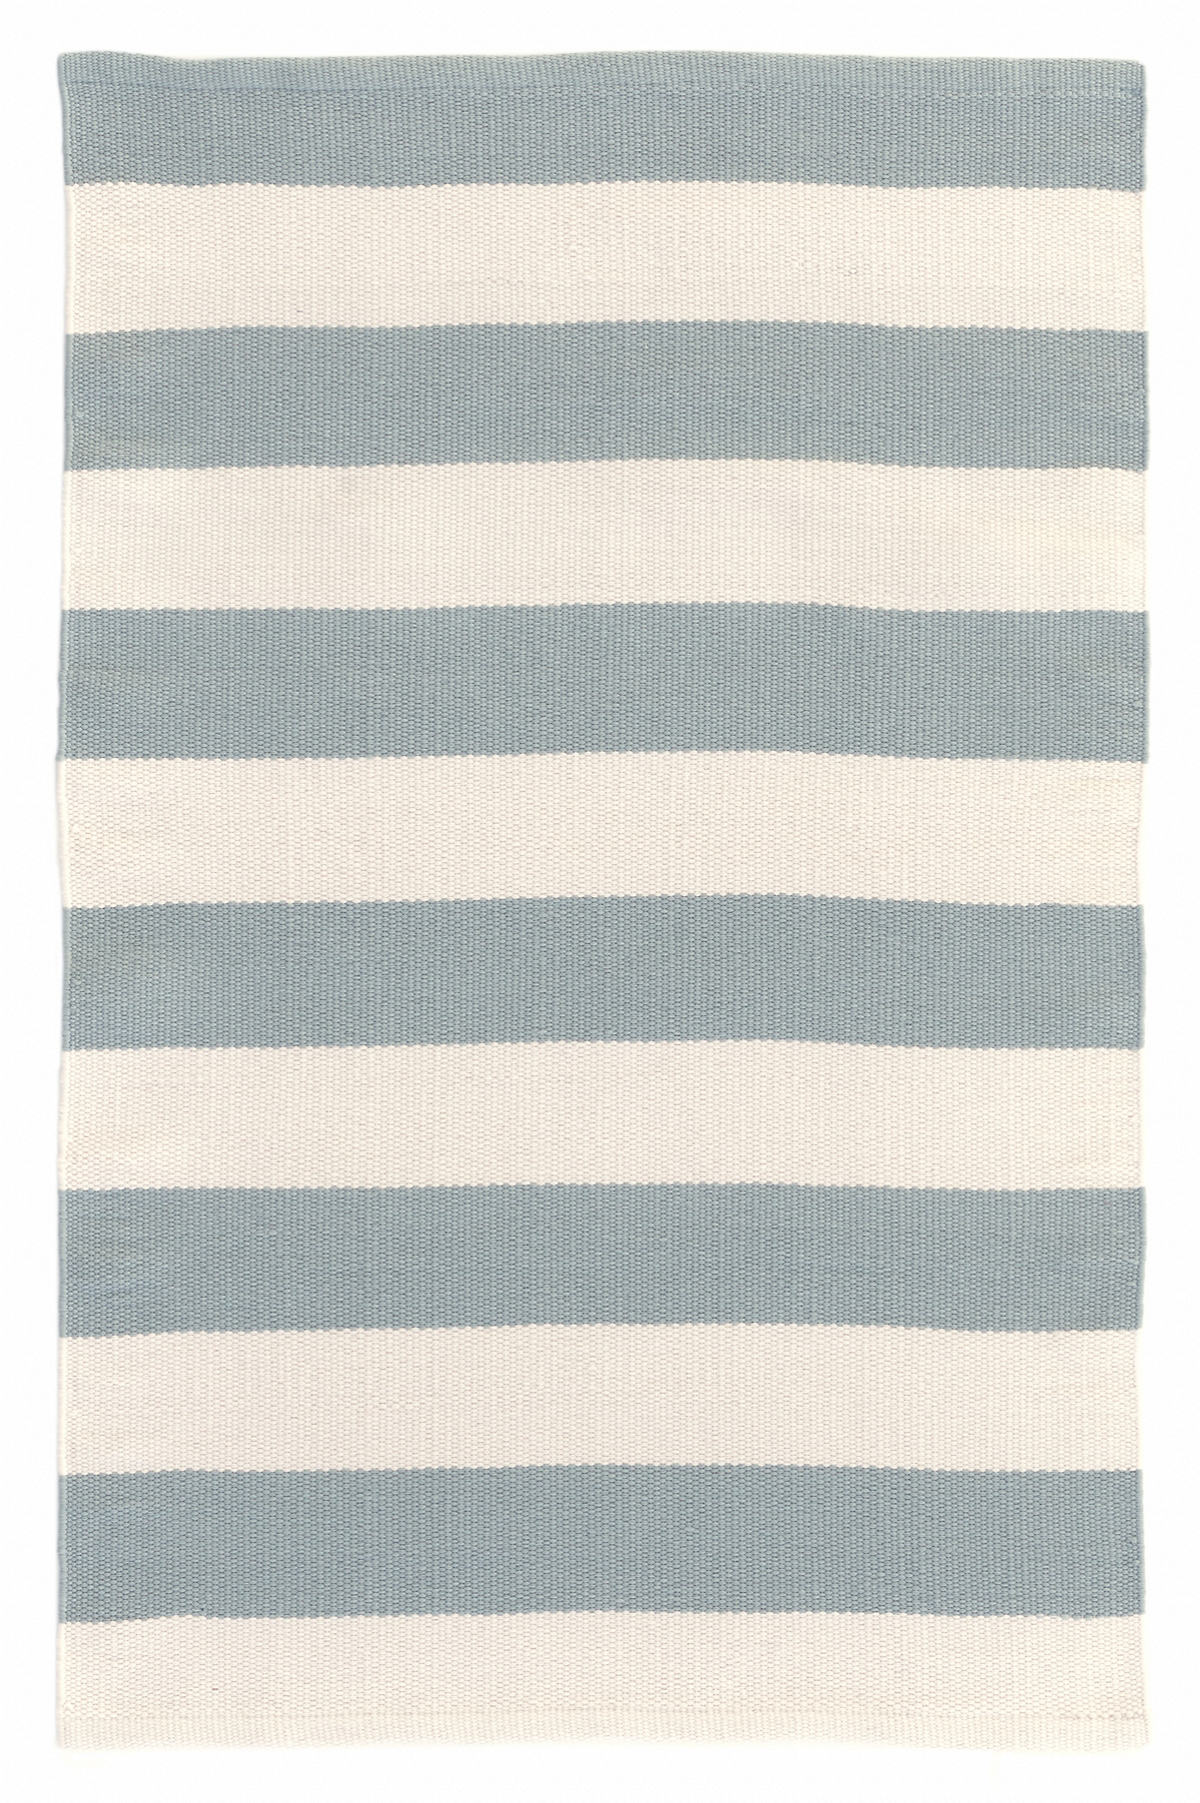 Blue Ivory Indoor Outdoor Rug, Blue And White Striped Indoor Outdoor Rug